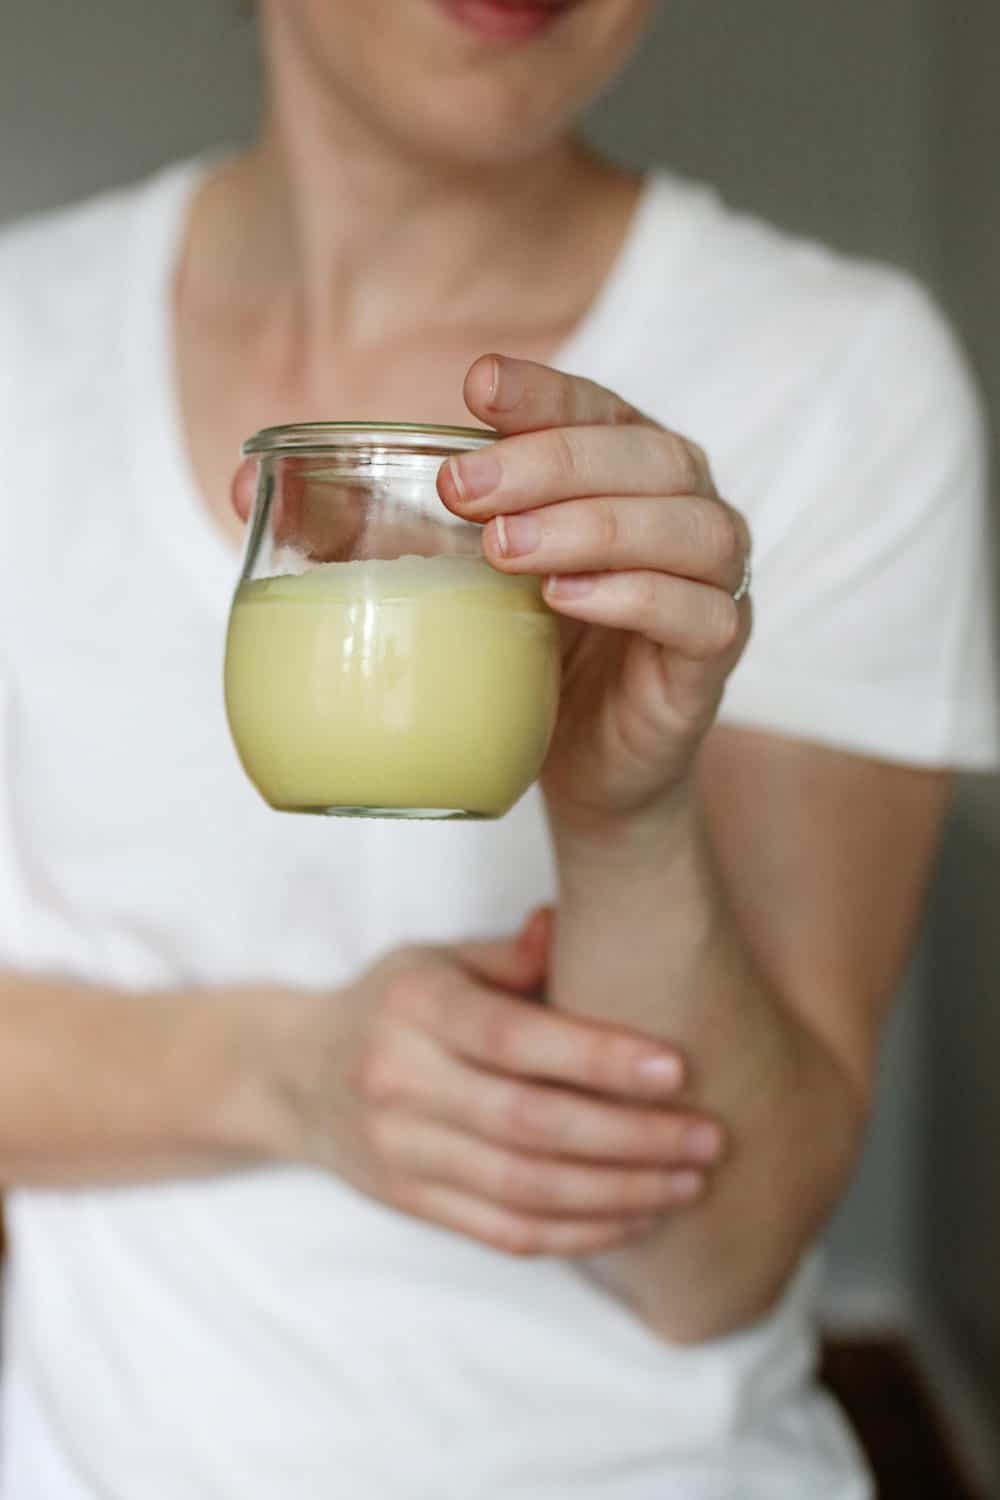 Skin soothing eczema balm recipe with essential oils